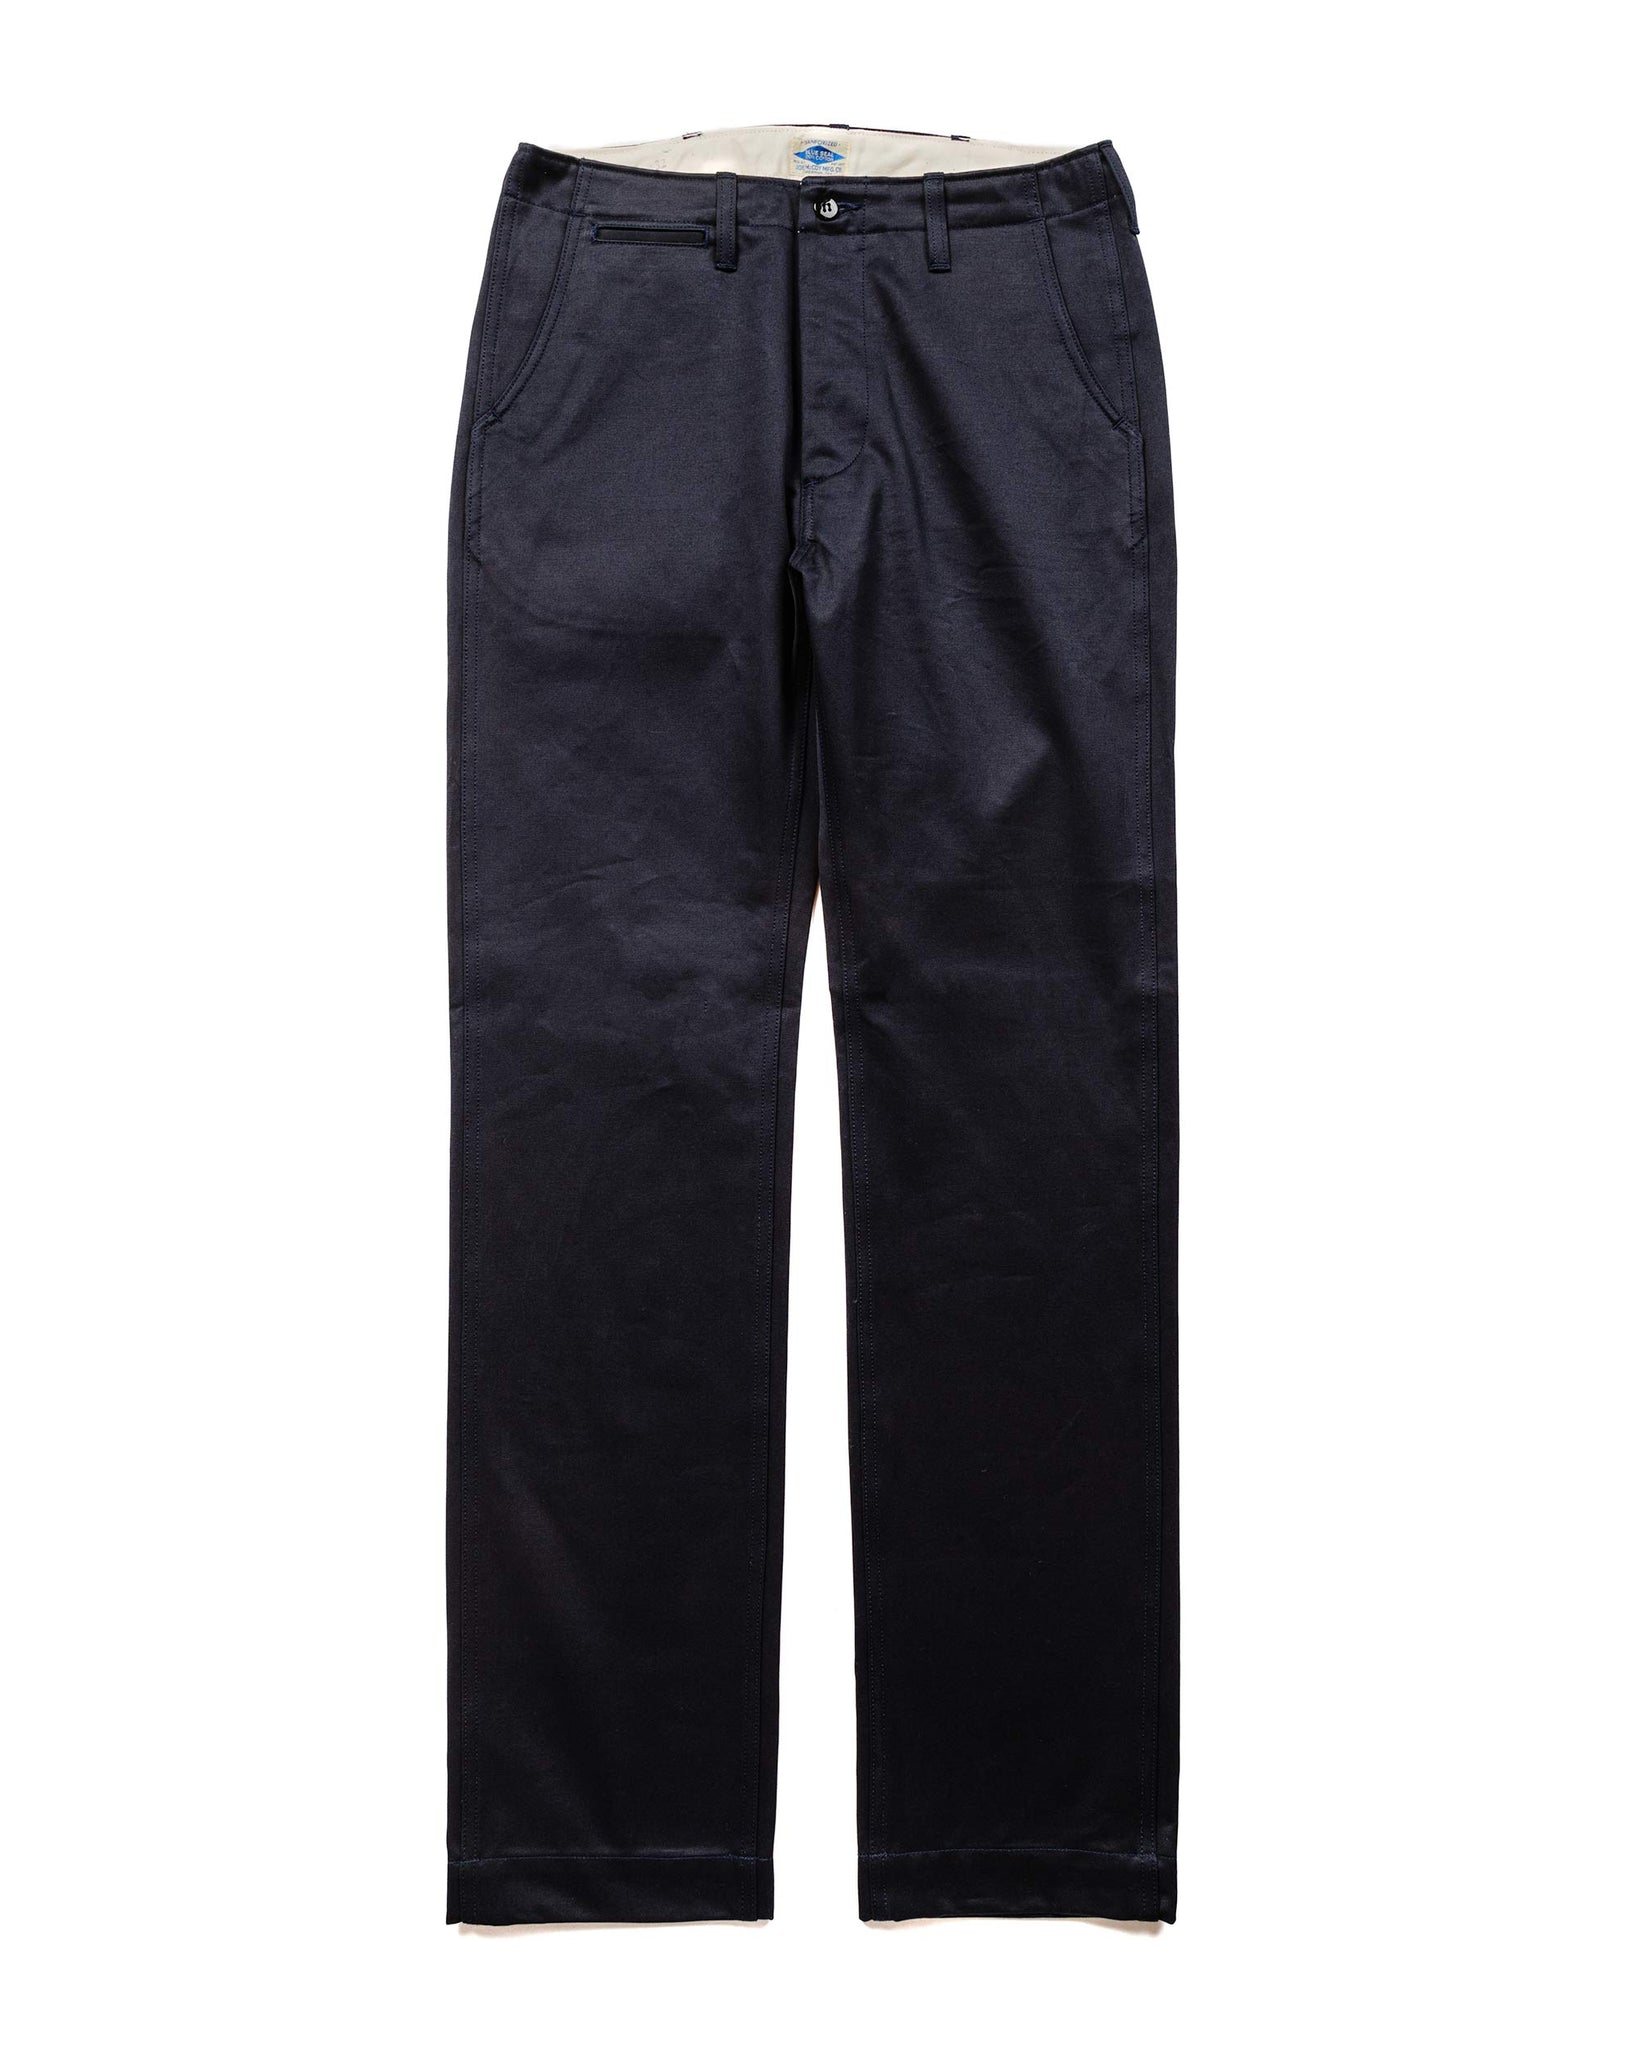 The Real McCoy's MP19010 Blue Seal Chino Trousers Navy